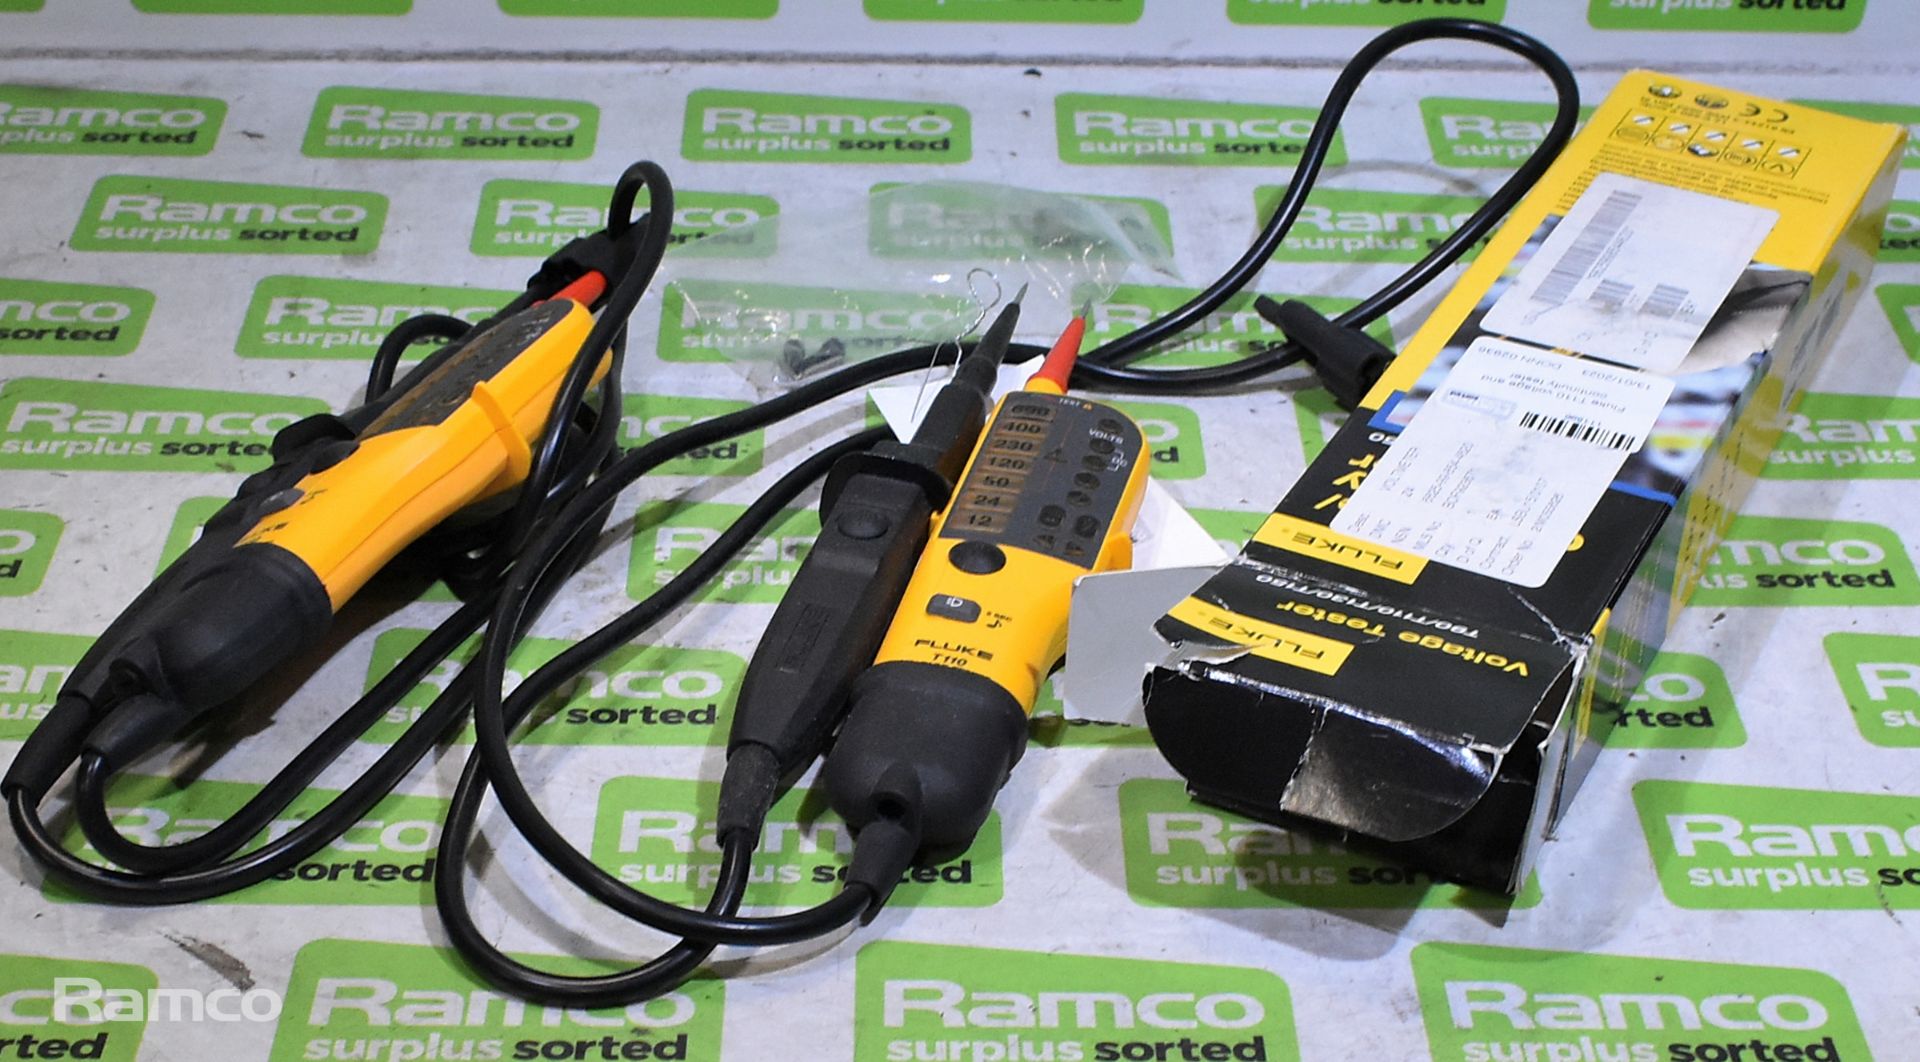 2x Fluke T110 voltage and continuity testers